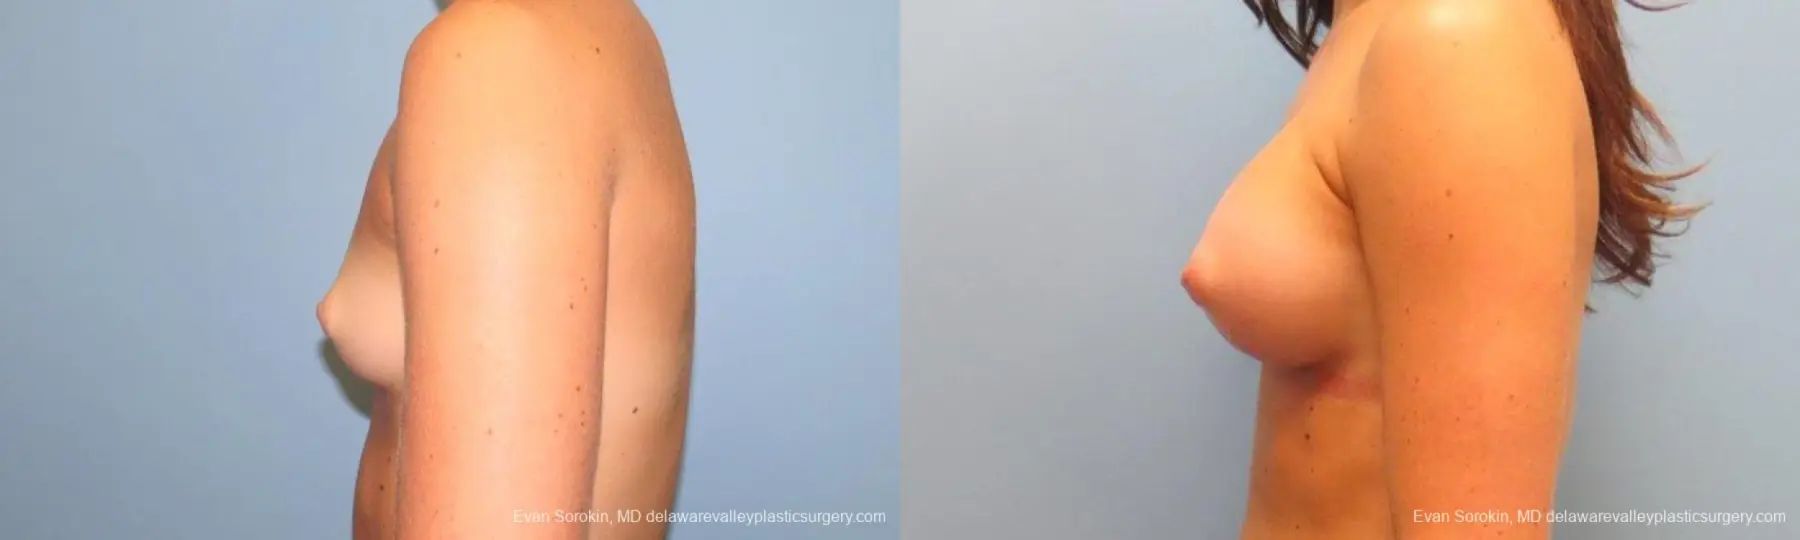 Philadelphia Breast Augmentation 9621 - Before and After 5